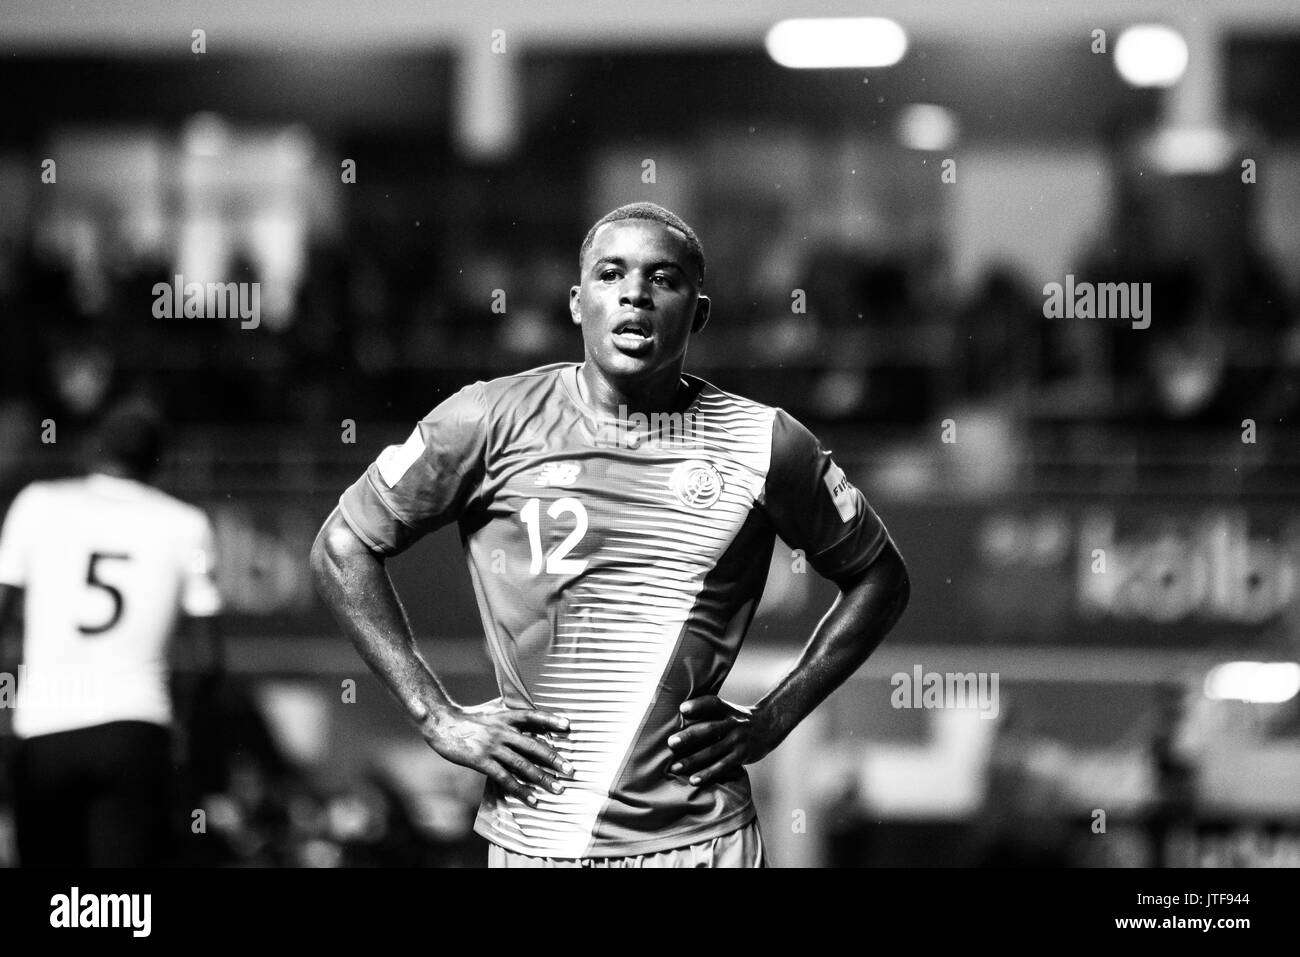 SAN JOSE, COSTA RICA. JUNE 13, 2017 - Costa Rica and Arsenal striker Joel Campbell. Costa Rica won 2-1 over Trinidad and Tobago, as Matchday 6 wrapped Stock Photo